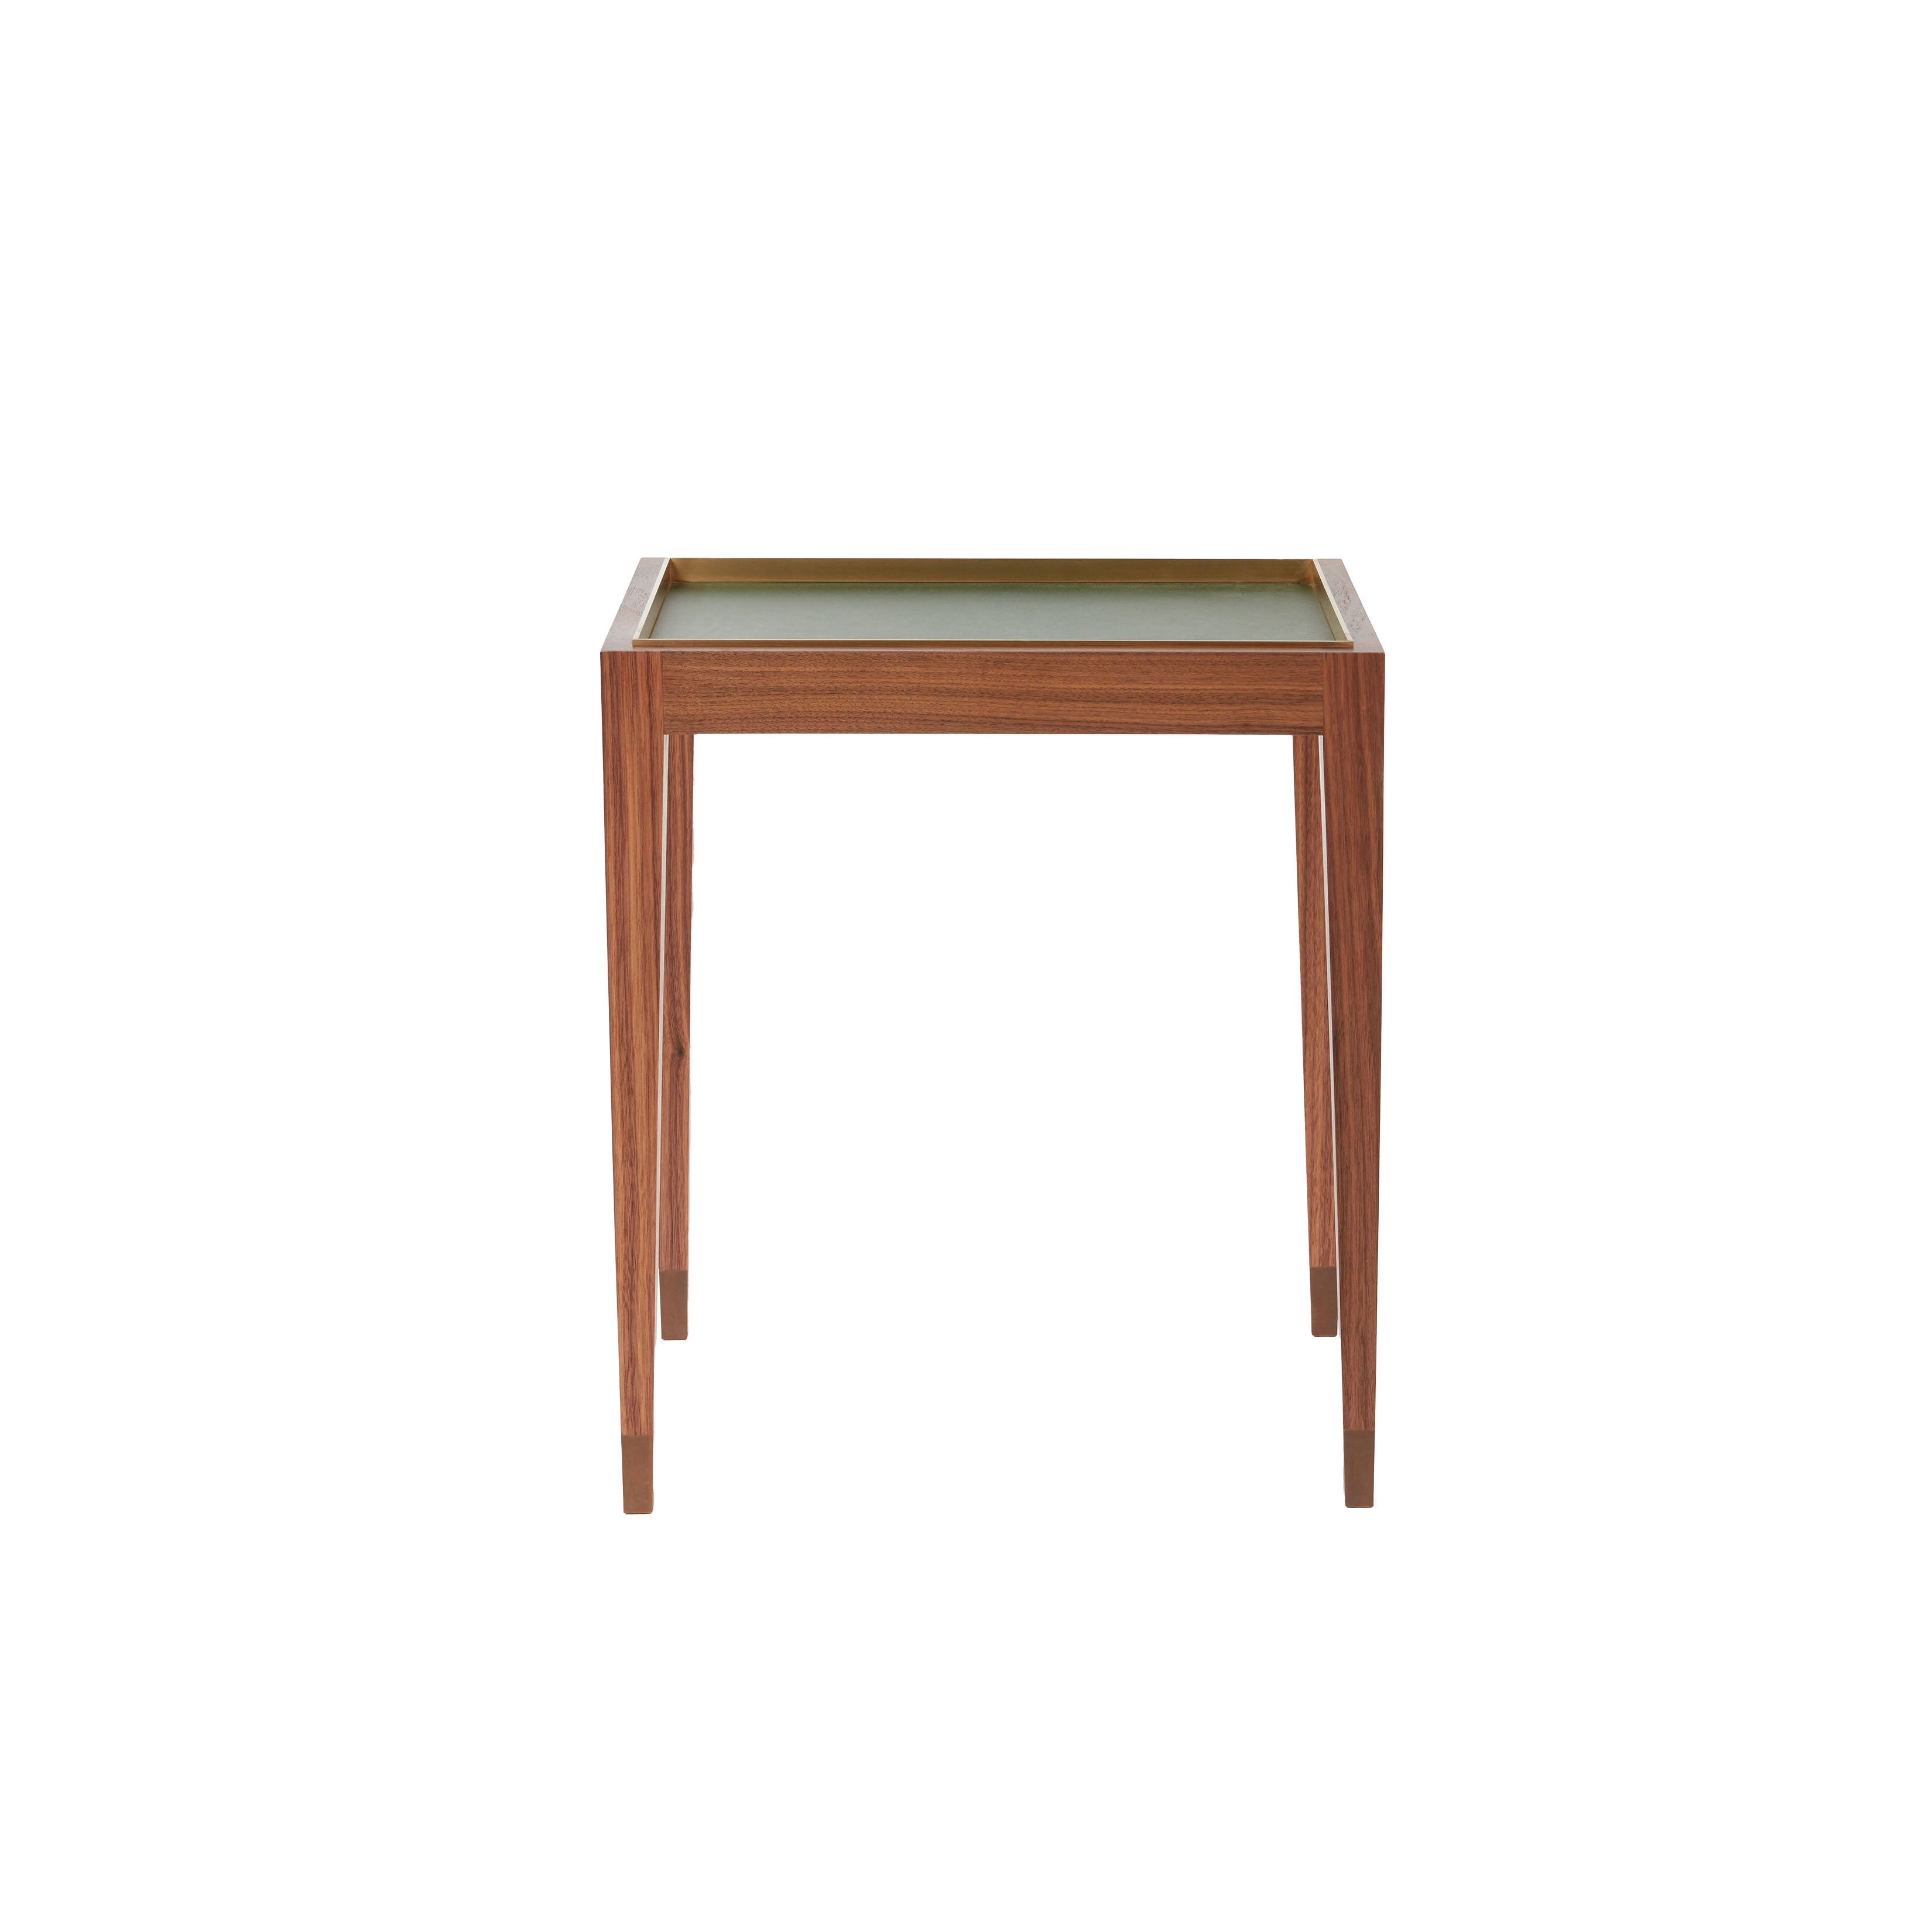 Nina Campbell End Table Gerome End Table in Green